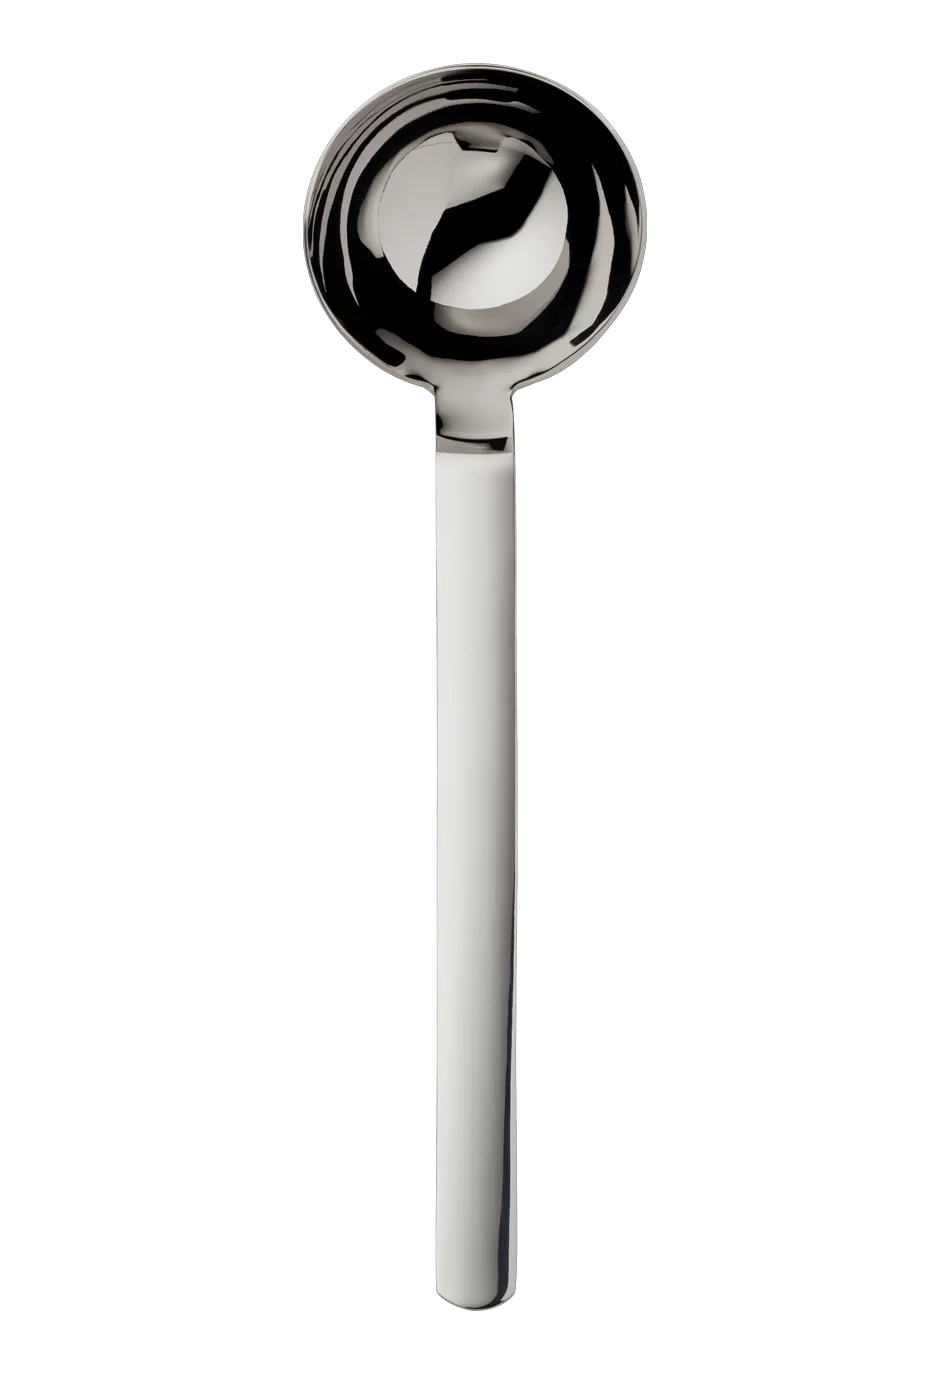 Topos Soup Ladle (18/8 stainless steel)